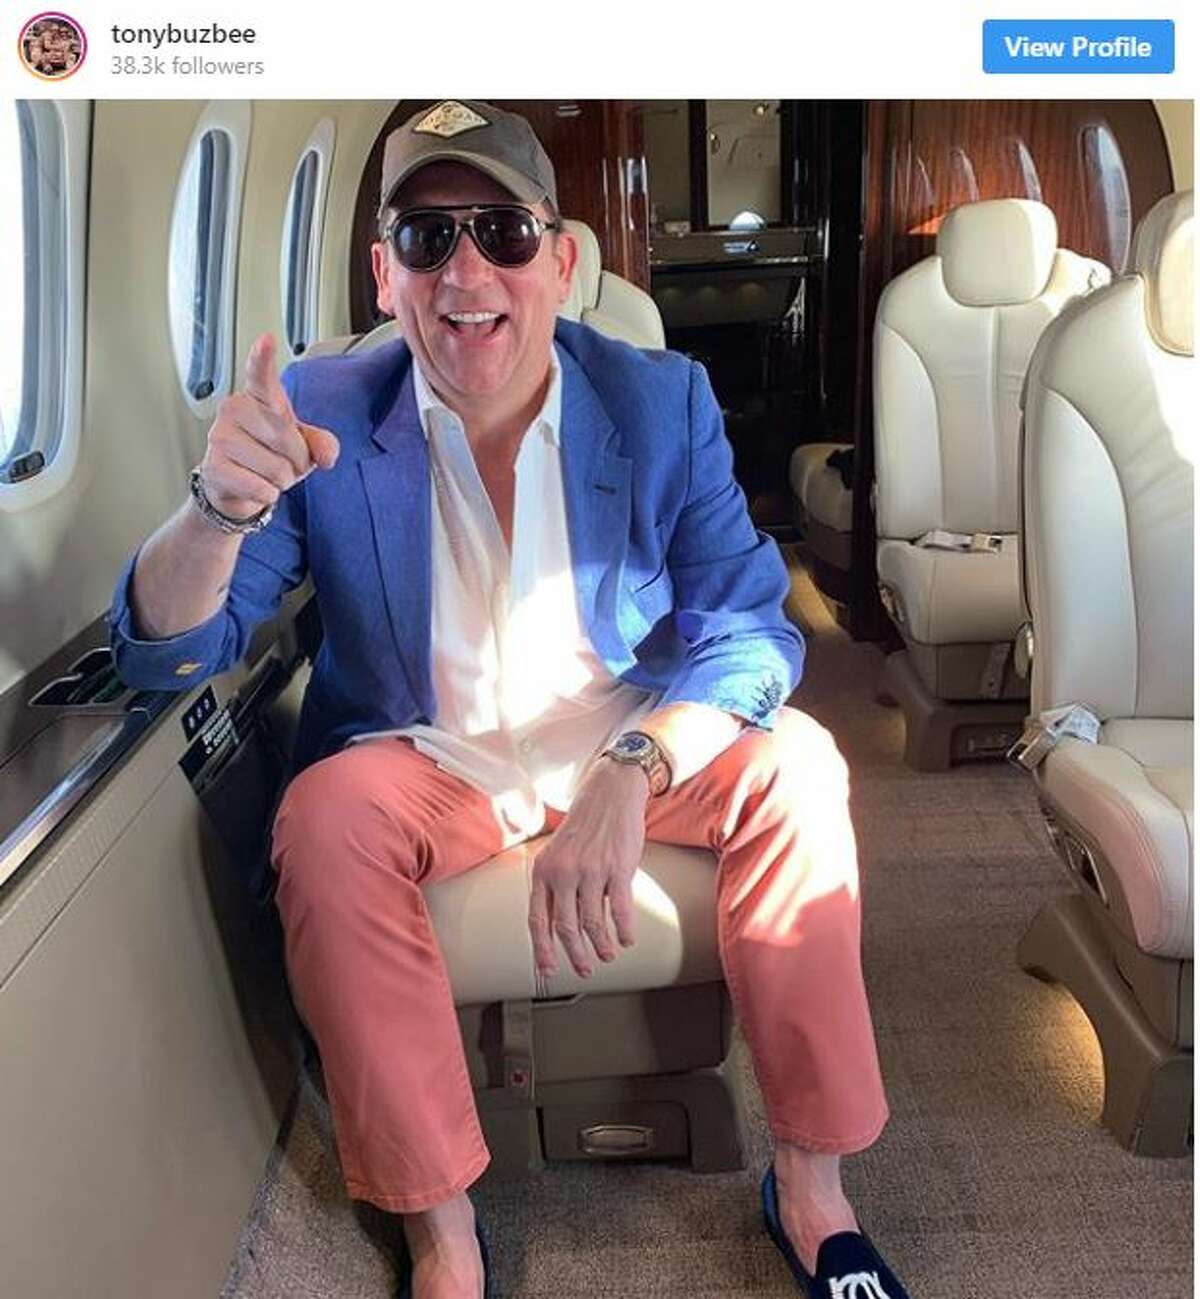 After 100% votes have been counted in Houston's hotly contested mayoral race, contender Tony Buzbee decided to head out of Houston on his private plane on Sunday.